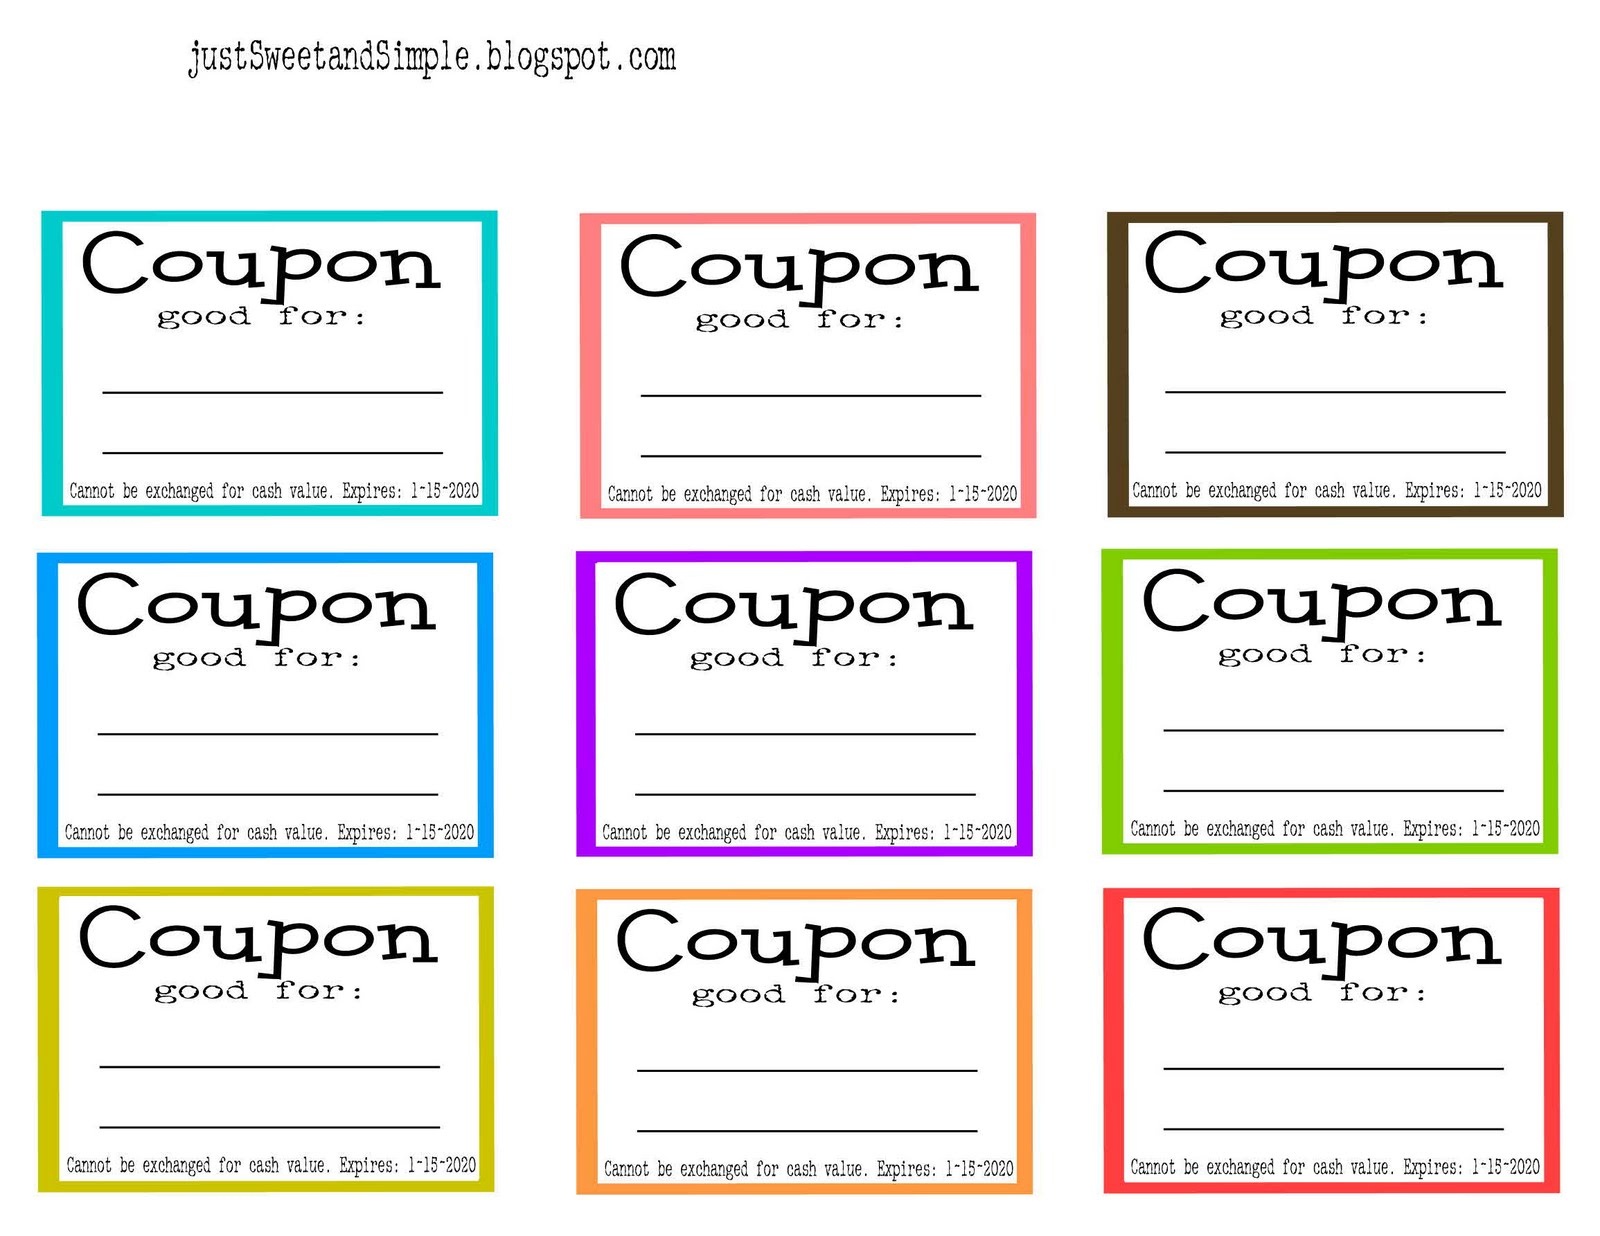 Free Printable Coupon Maker - Demir.iso-Consulting.co - Make Your Own Printable Coupons For Free